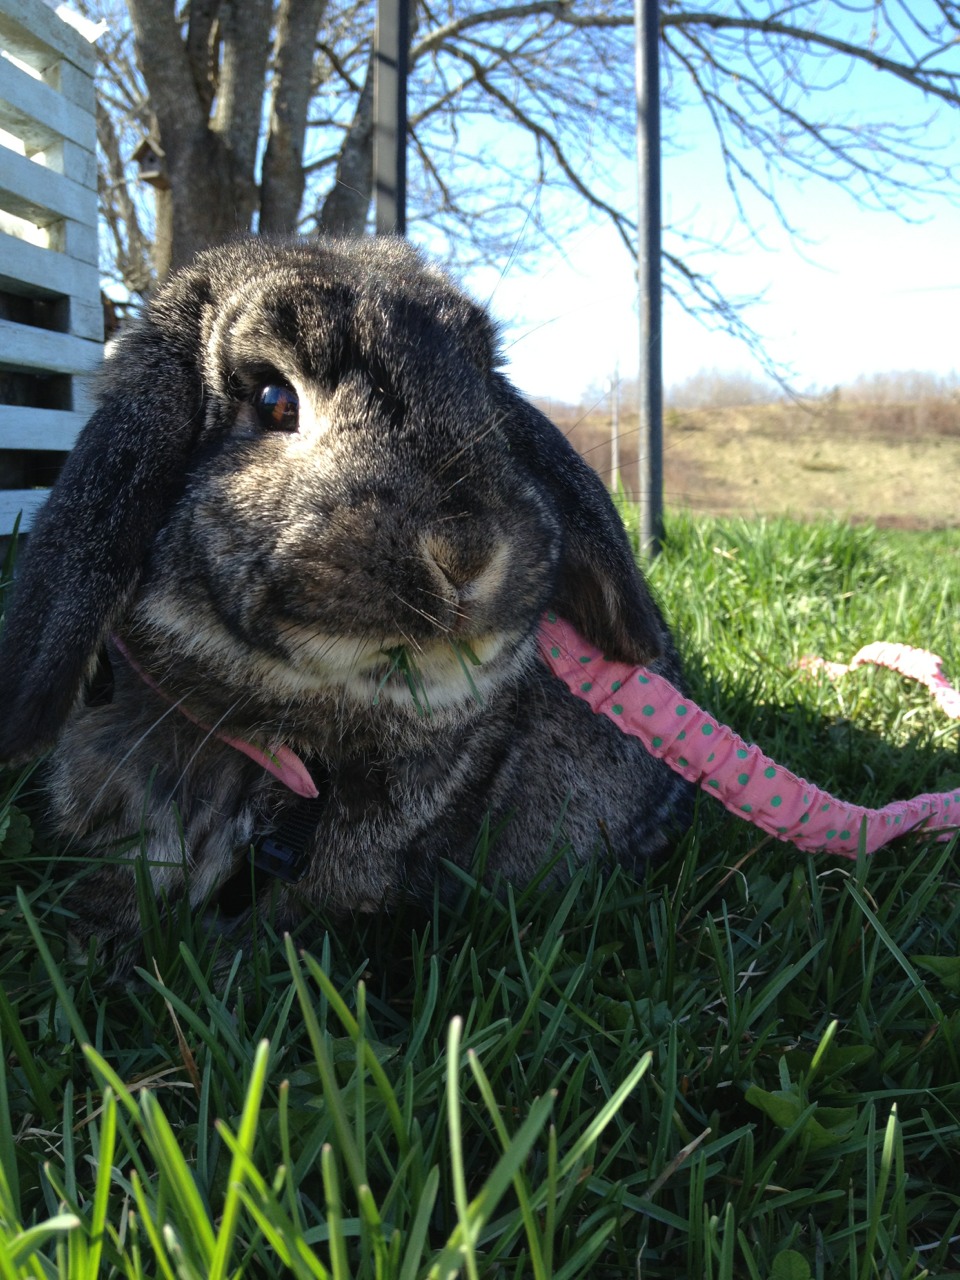 Bunny Has a Mouthful of Grass